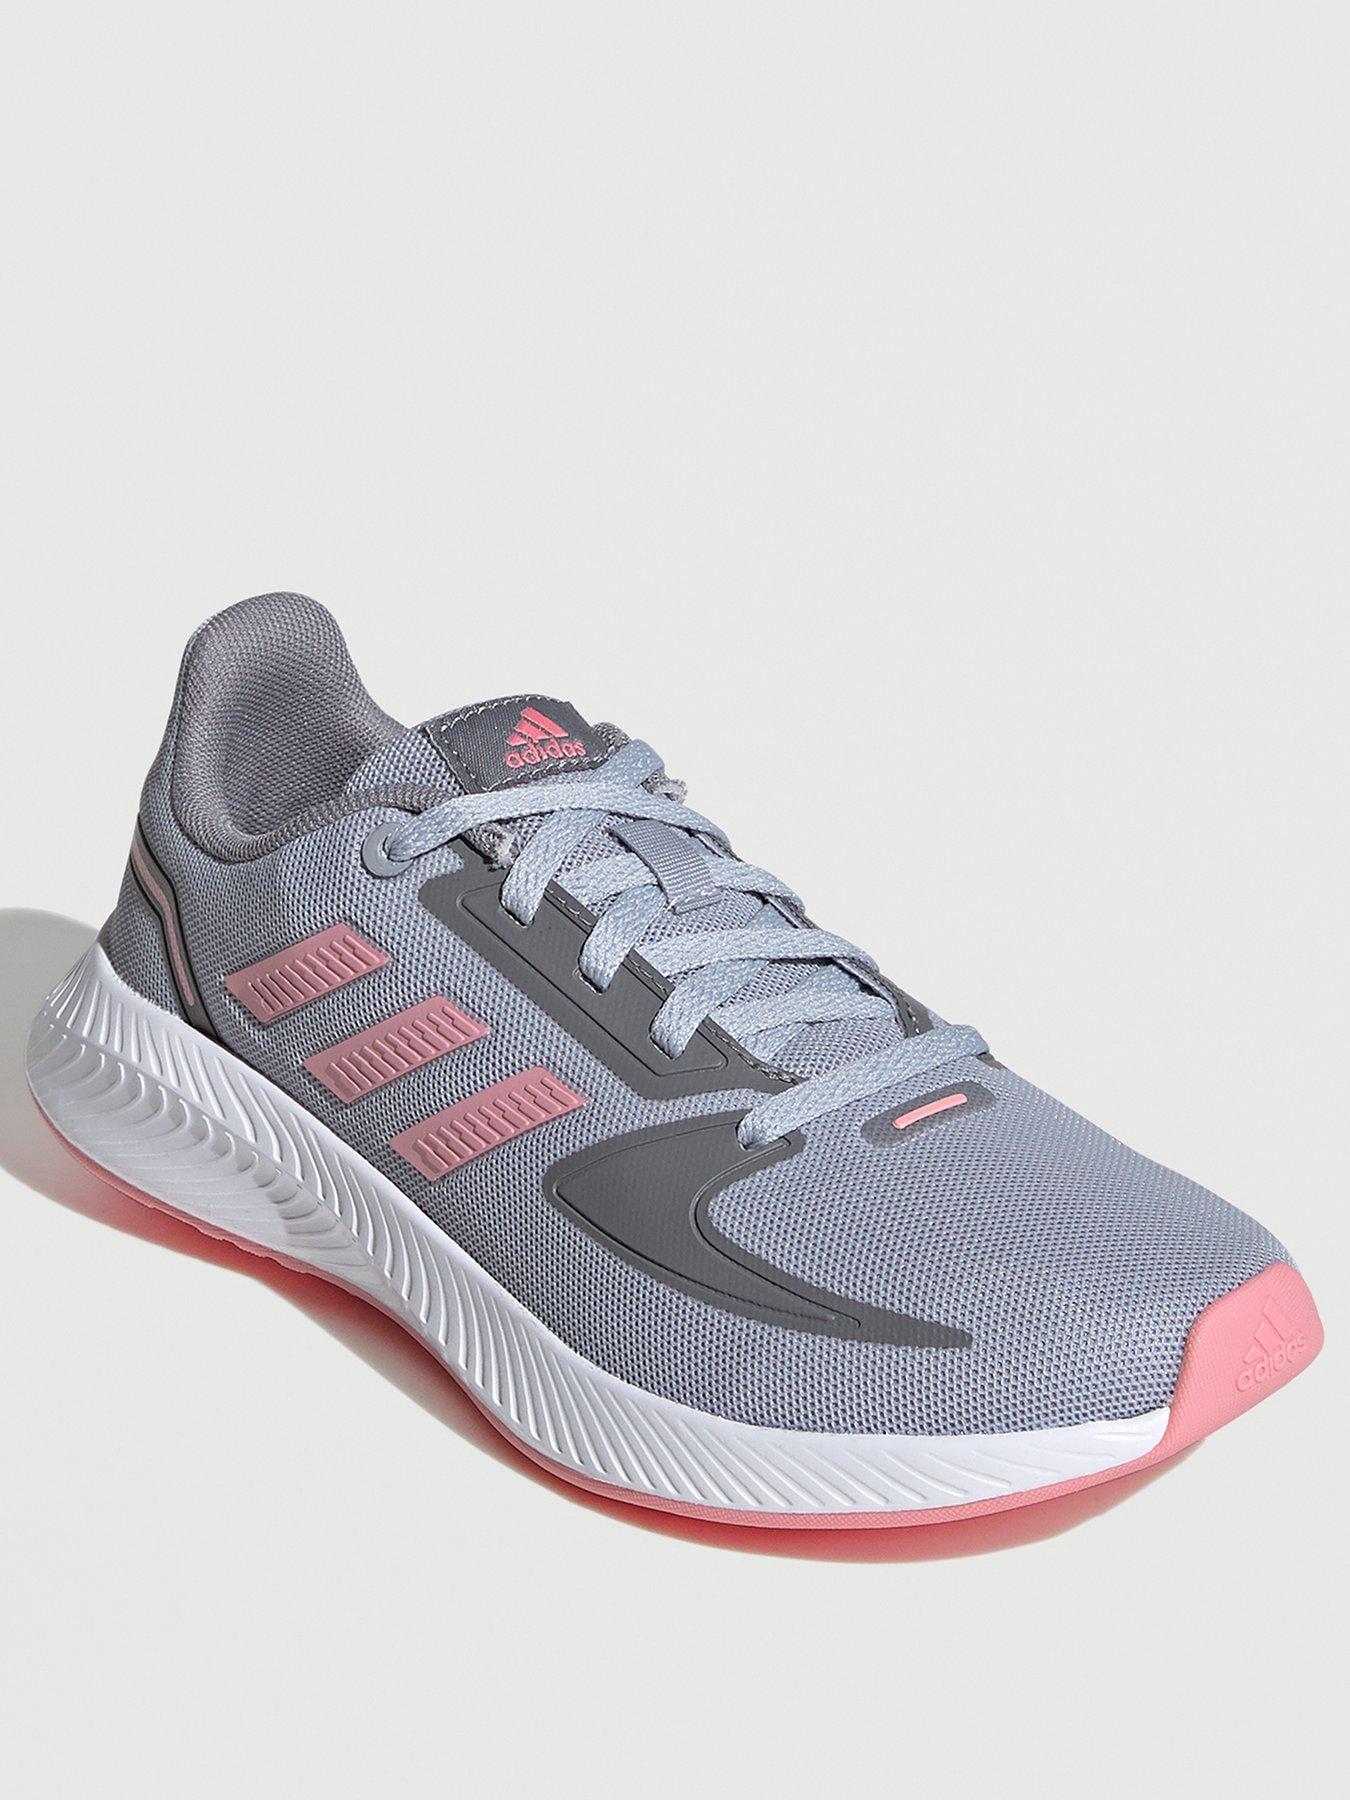 adidas sport shoes for kids